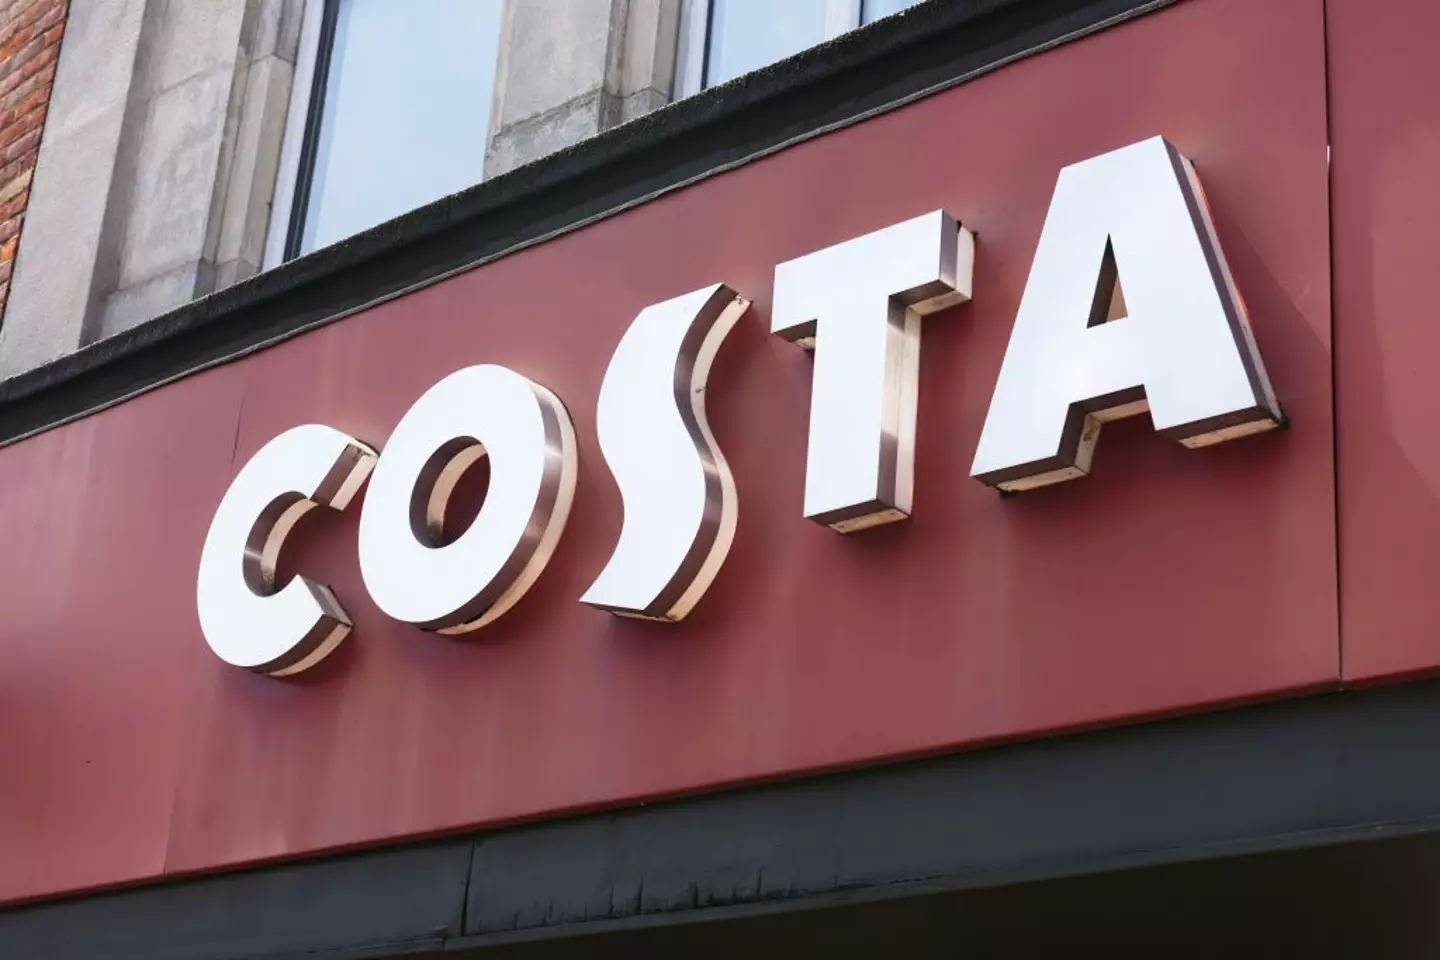 Costa has reduced the number of sausages from four to three.